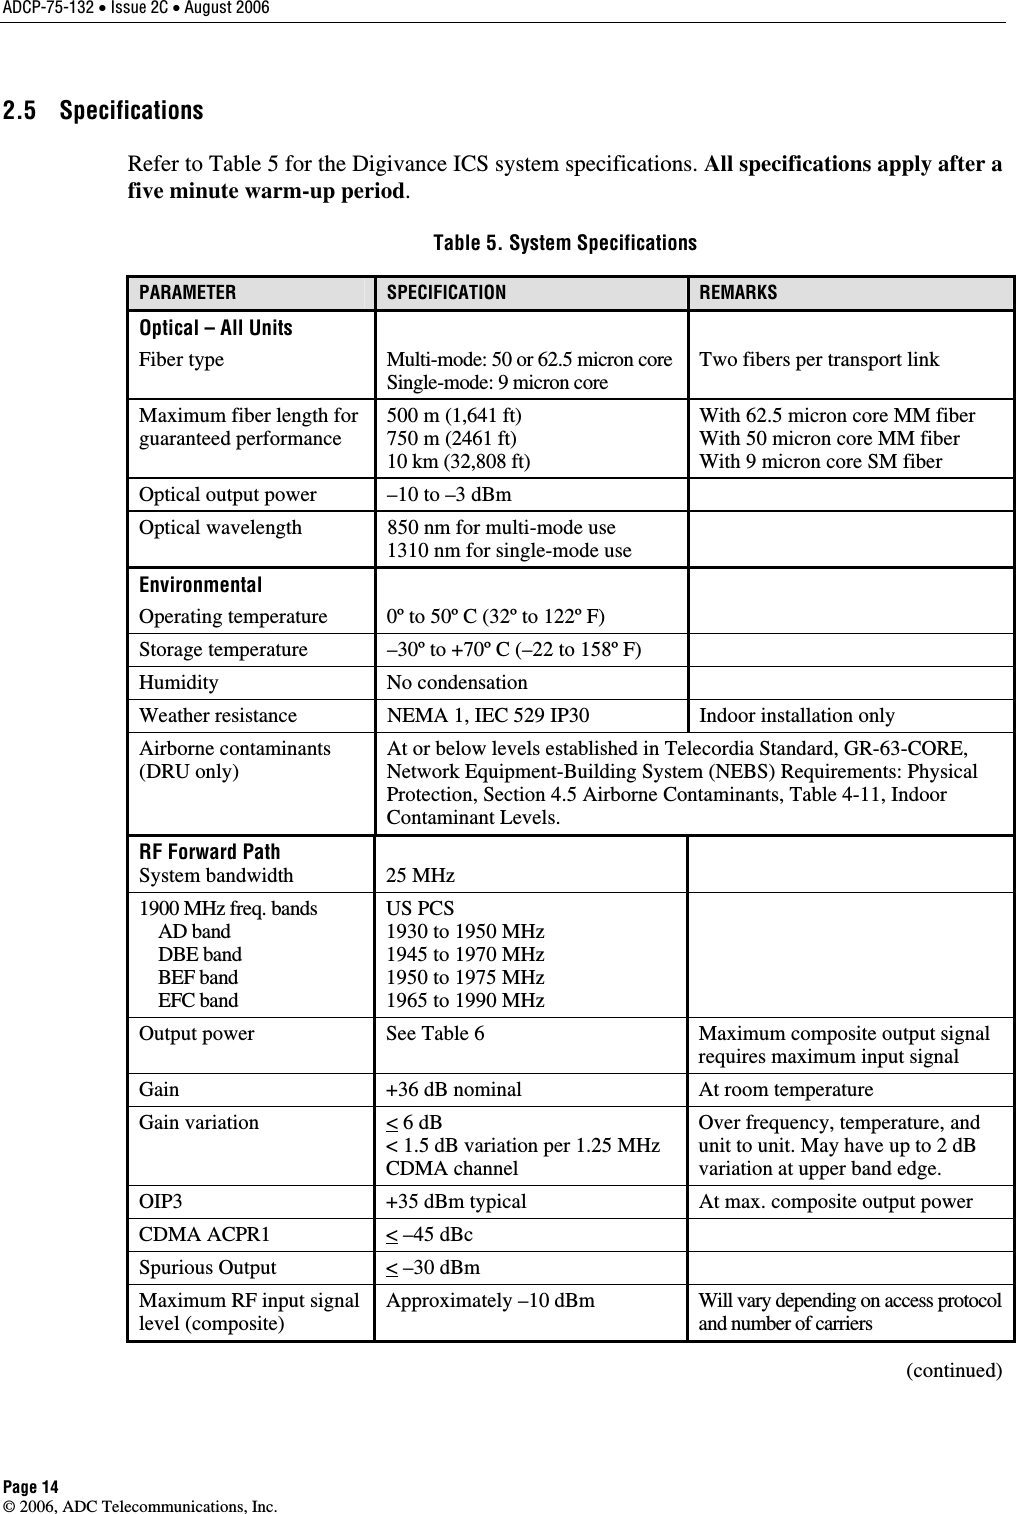 ADCP-75-132 • Issue 2C • August 2006 Page 14 © 2006, ADC Telecommunications, Inc. 2.5 Specifications Refer to Table 5 for the Digivance ICS system specifications. All specifications apply after a five minute warm-up period.  Table 5. System Specifications PARAMETER  SPECIFICATION  REMARKS Optical – All Units Fiber type  Multi-mode: 50 or 62.5 micron coreSingle-mode: 9 micron core  Two fibers per transport link Maximum fiber length for guaranteed performance 500 m (1,641 ft) 750 m (2461 ft) 10 km (32,808 ft) With 62.5 micron core MM fiber With 50 micron core MM fiber With 9 micron core SM fiber Optical output power  –10 to –3 dBm   Optical wavelength  850 nm for multi-mode use 1310 nm for single-mode use  Environmental Operating temperature  0º to 50º C (32º to 122º F)  Storage temperature  –30º to +70º C (–22 to 158º F)   Humidity No condensation   Weather resistance  NEMA 1, IEC 529 IP30  Indoor installation only Airborne contaminants (DRU only) At or below levels established in Telecordia Standard, GR-63-CORE, Network Equipment-Building System (NEBS) Requirements: Physical Protection, Section 4.5 Airborne Contaminants, Table 4-11, Indoor Contaminant Levels.  RF Forward Path System bandwidth  25 MHz  1900 MHz freq. bands     AD band     DBE band     BEF band     EFC band US PCS 1930 to 1950 MHz 1945 to 1970 MHz 1950 to 1975 MHz 1965 to 1990 MHz  Output power  See Table 6  Maximum composite output signal requires maximum input signal  Gain  +36 dB nominal  At room temperature Gain variation  &lt; 6 dB &lt; 1.5 dB variation per 1.25 MHz CDMA channel Over frequency, temperature, and unit to unit. May have up to 2 dB variation at upper band edge.  OIP3  +35 dBm typical  At max. composite output power CDMA ACPR1  &lt; –45 dBc   Spurious Output  &lt; –30 dBm   Maximum RF input signal level (composite) Approximately –10 dBm  Will vary depending on access protocol and number of carriers (continued) 